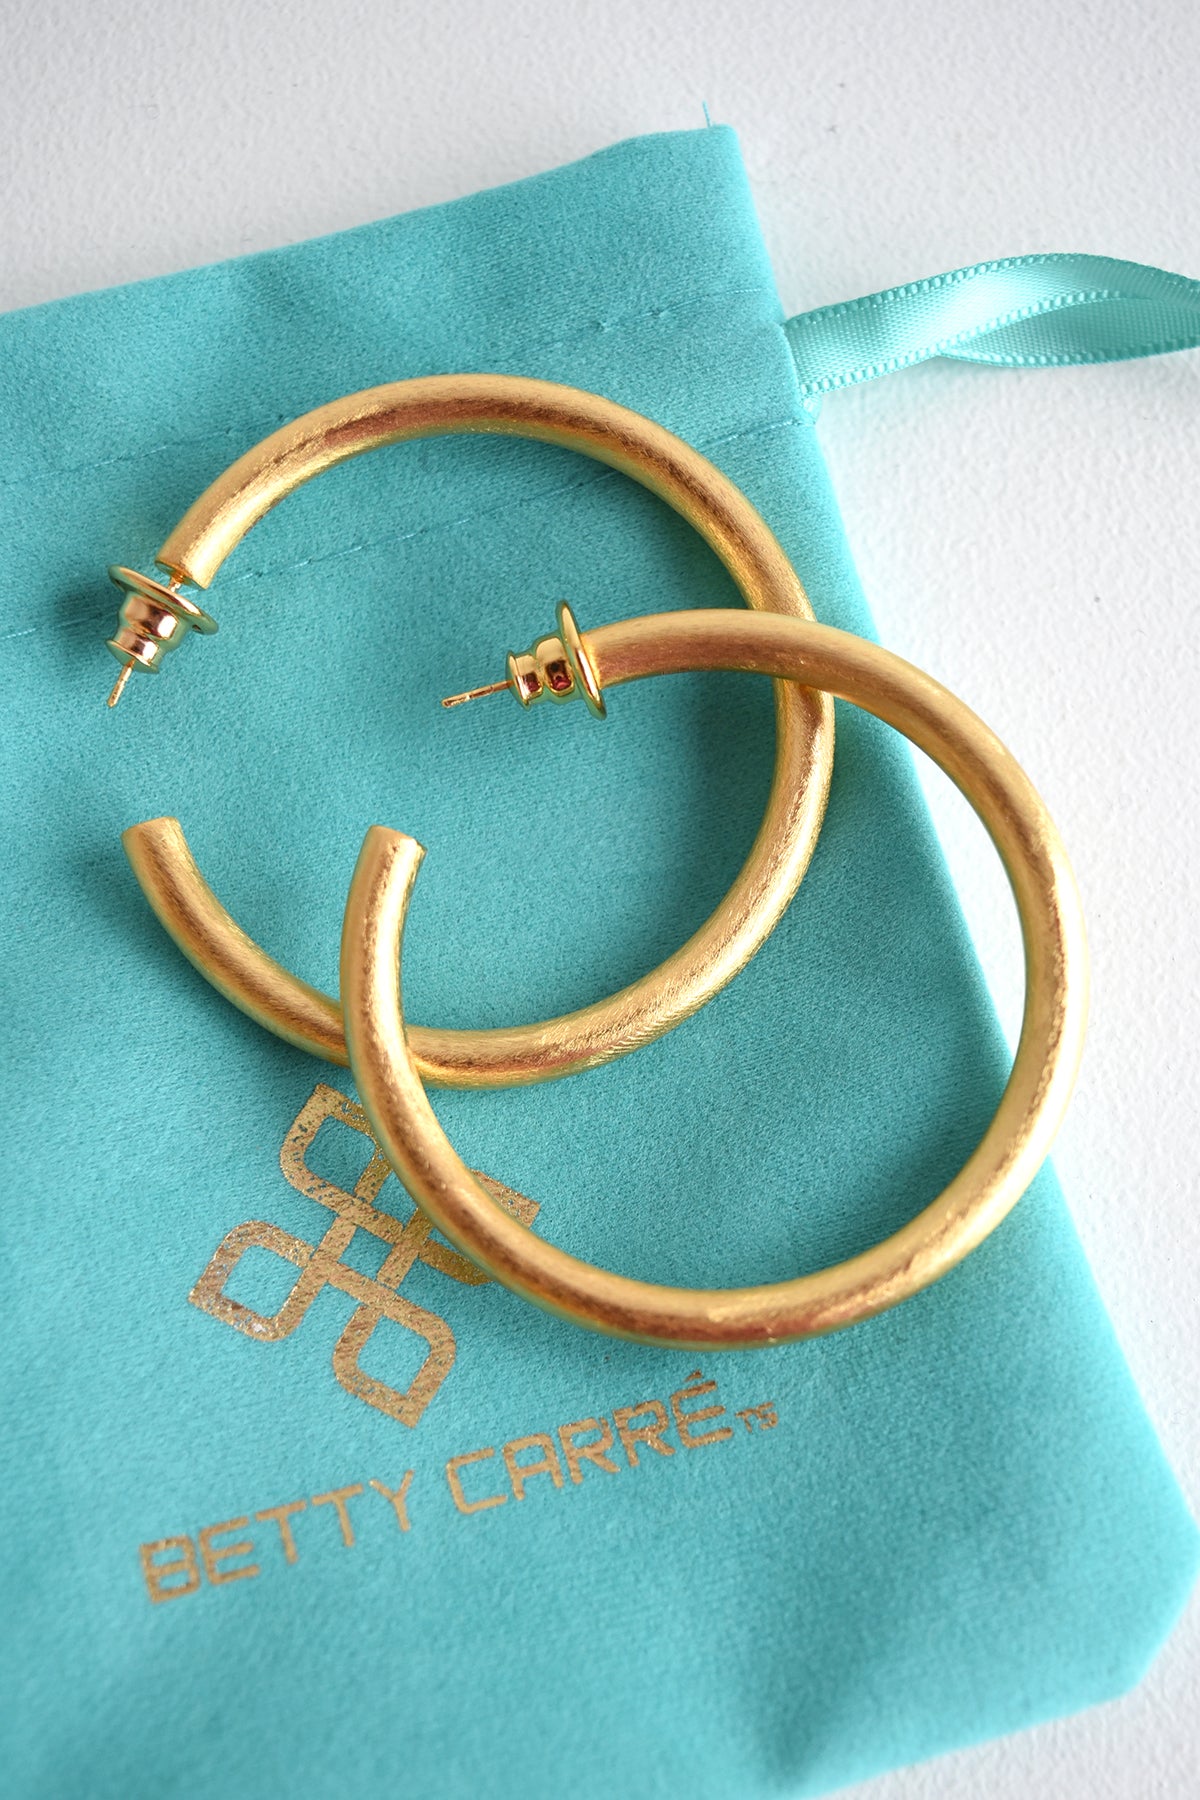 BETTY CARRE 2” GOLD HOOPS